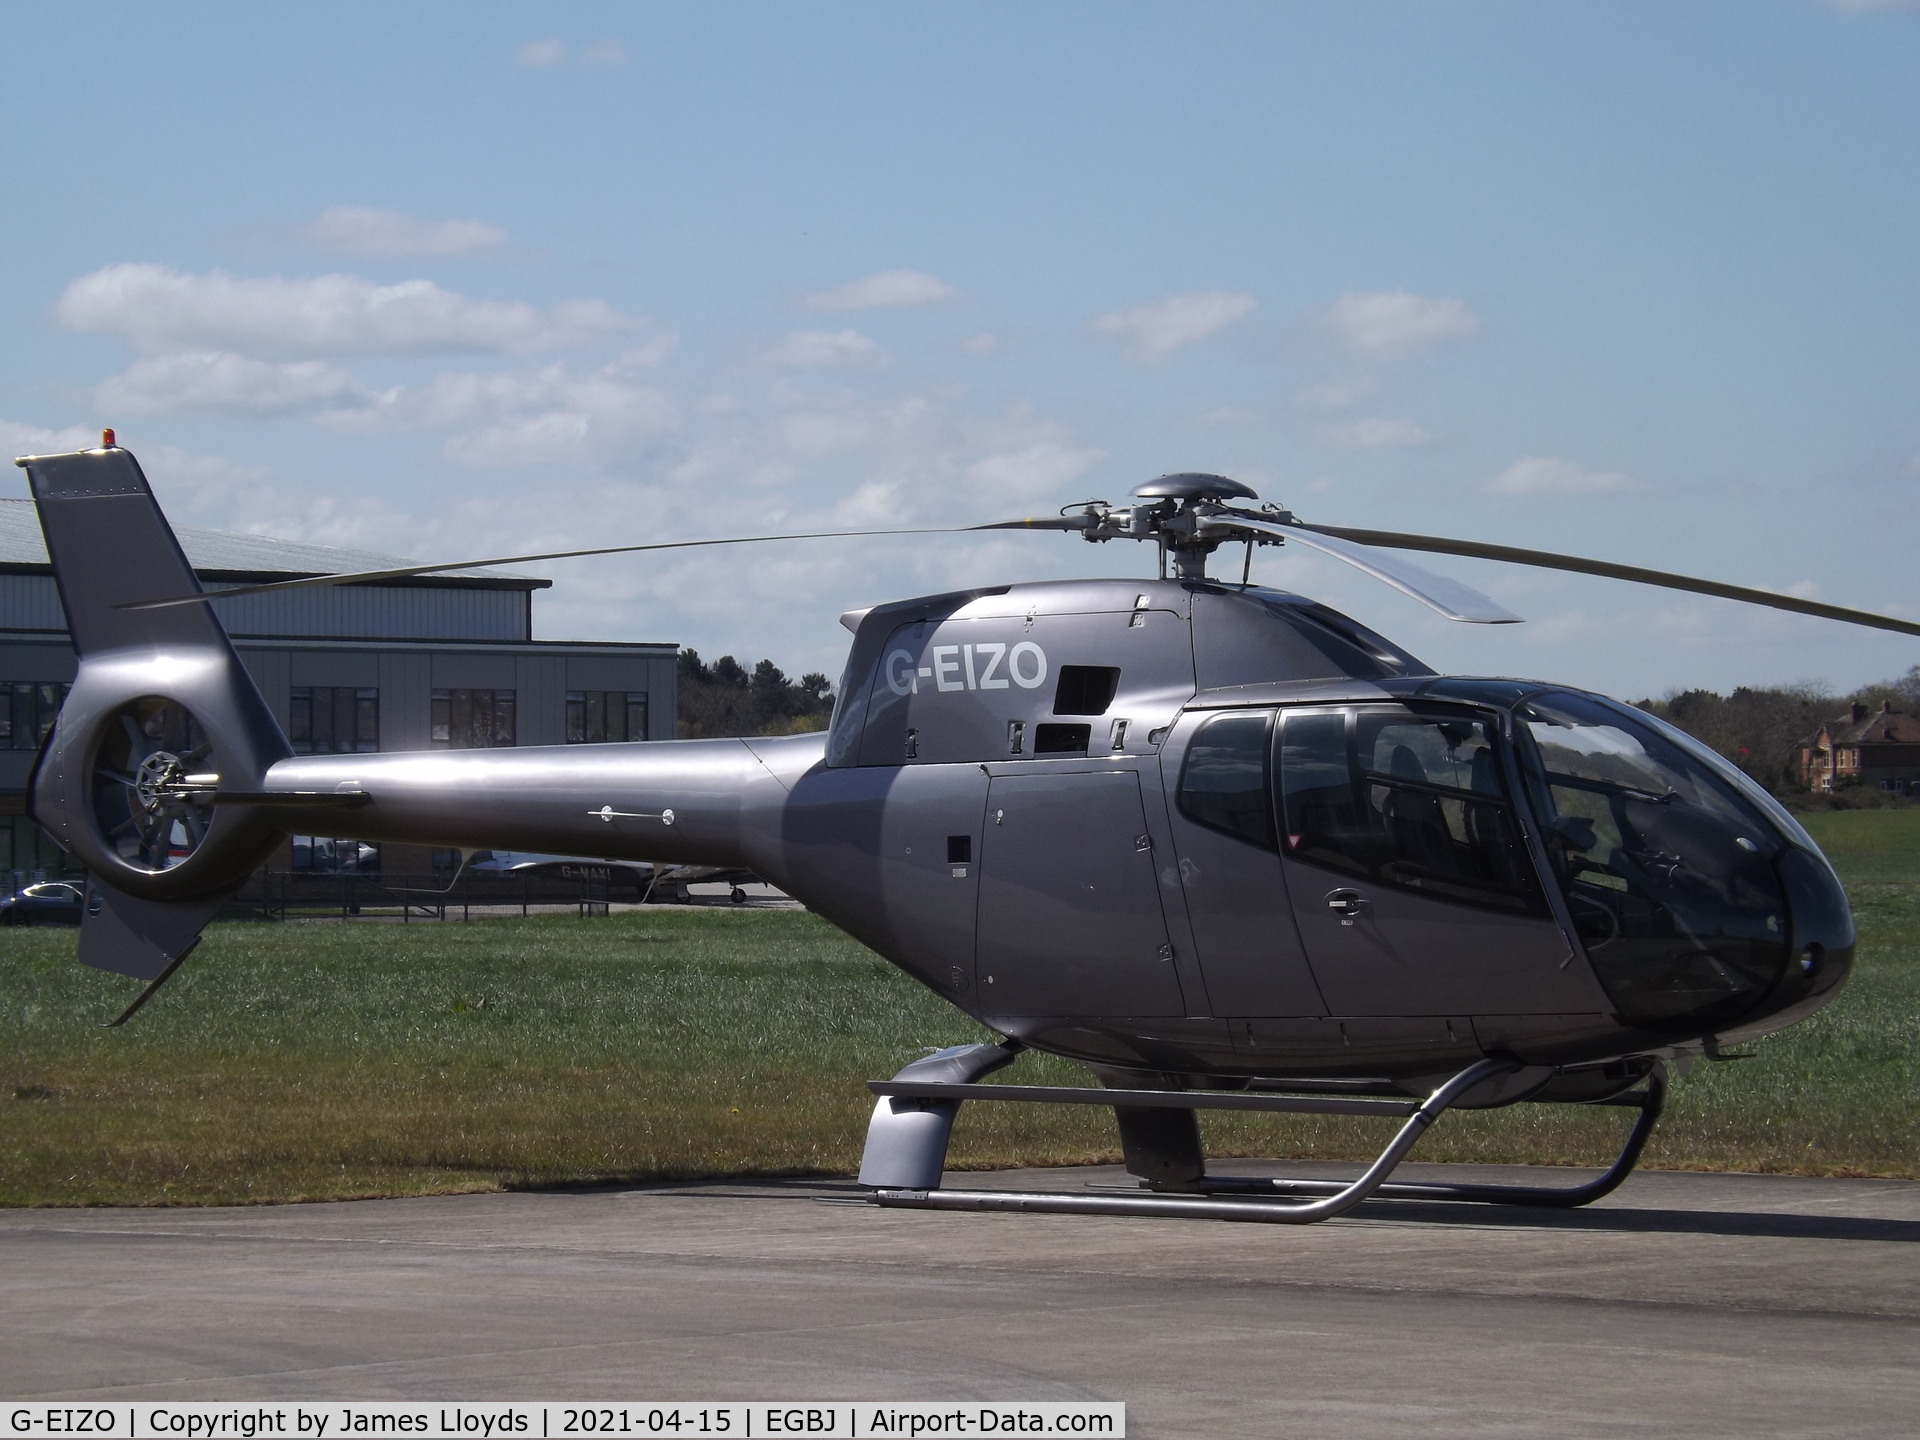 G-EIZO, 2000 Eurocopter EC-120B Colibri C/N 1120, Parked at Gloucestershire Airport.